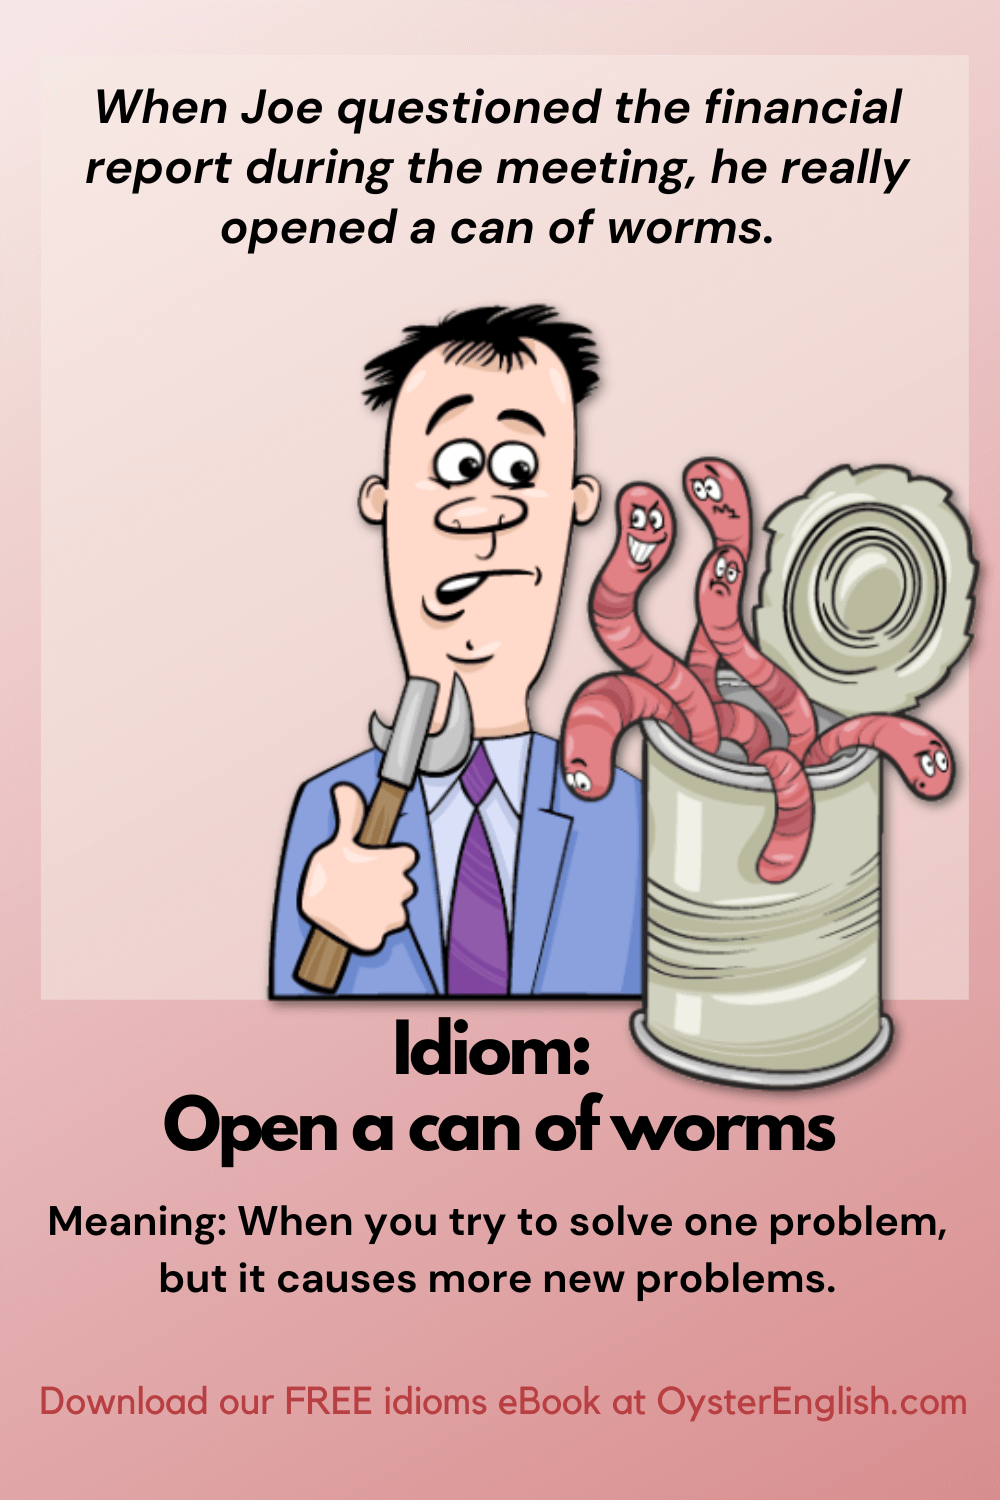 Cartoon man looks shocked at tangled worms from an opened can, illustrating the idiom 'open a can of worms.' Caption: Joe's question at the meeting opened a can of worms.